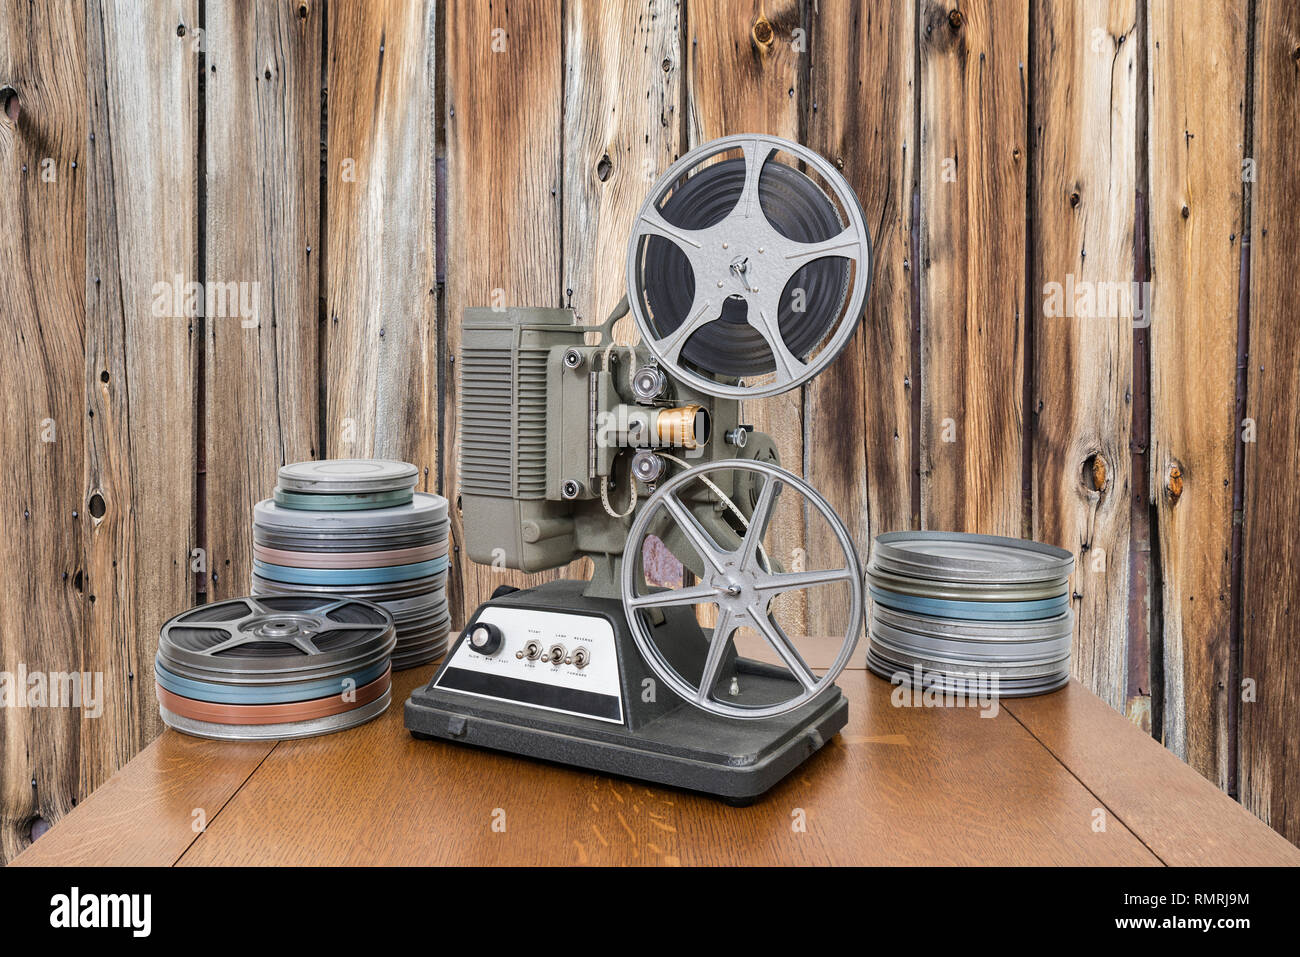 Vintage 8mm home movie projector and film cans with old wood wall